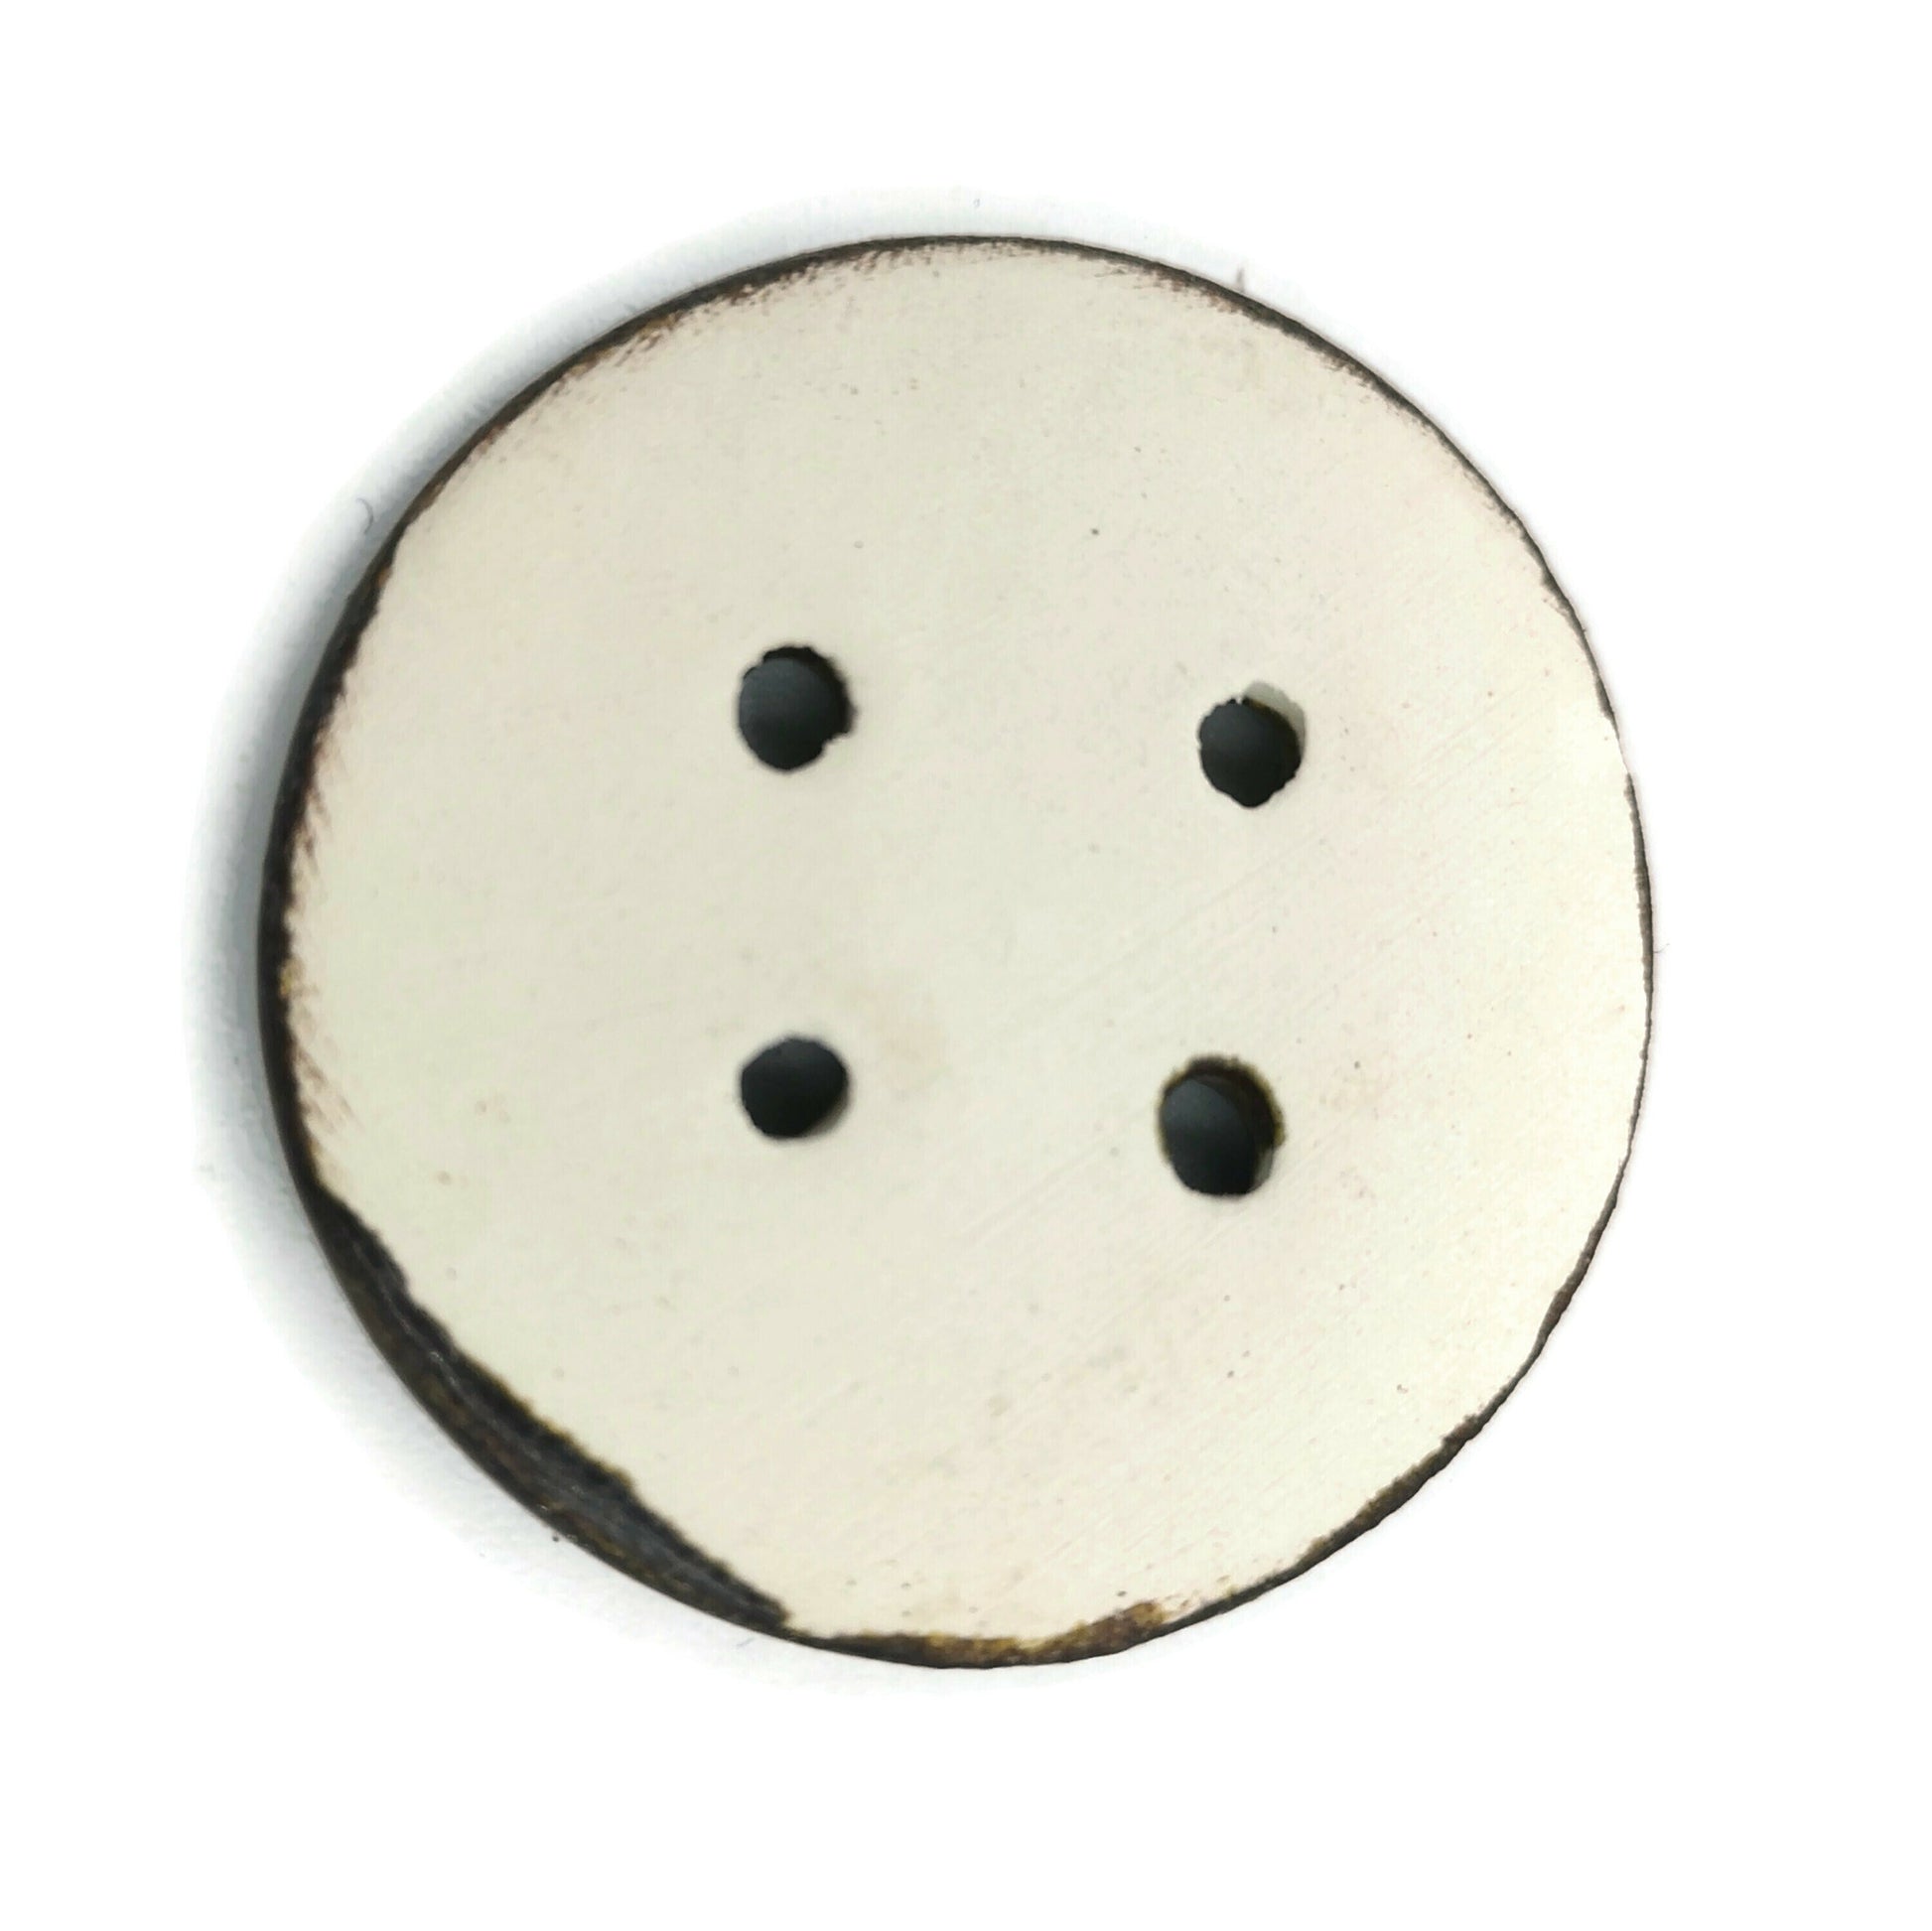 FANCY SEWING BUTTONS For Crafts With Antique Look, Extra Large Round Shaped Ceramic Buttons For Upholstery - Ceramica Ana Rafael